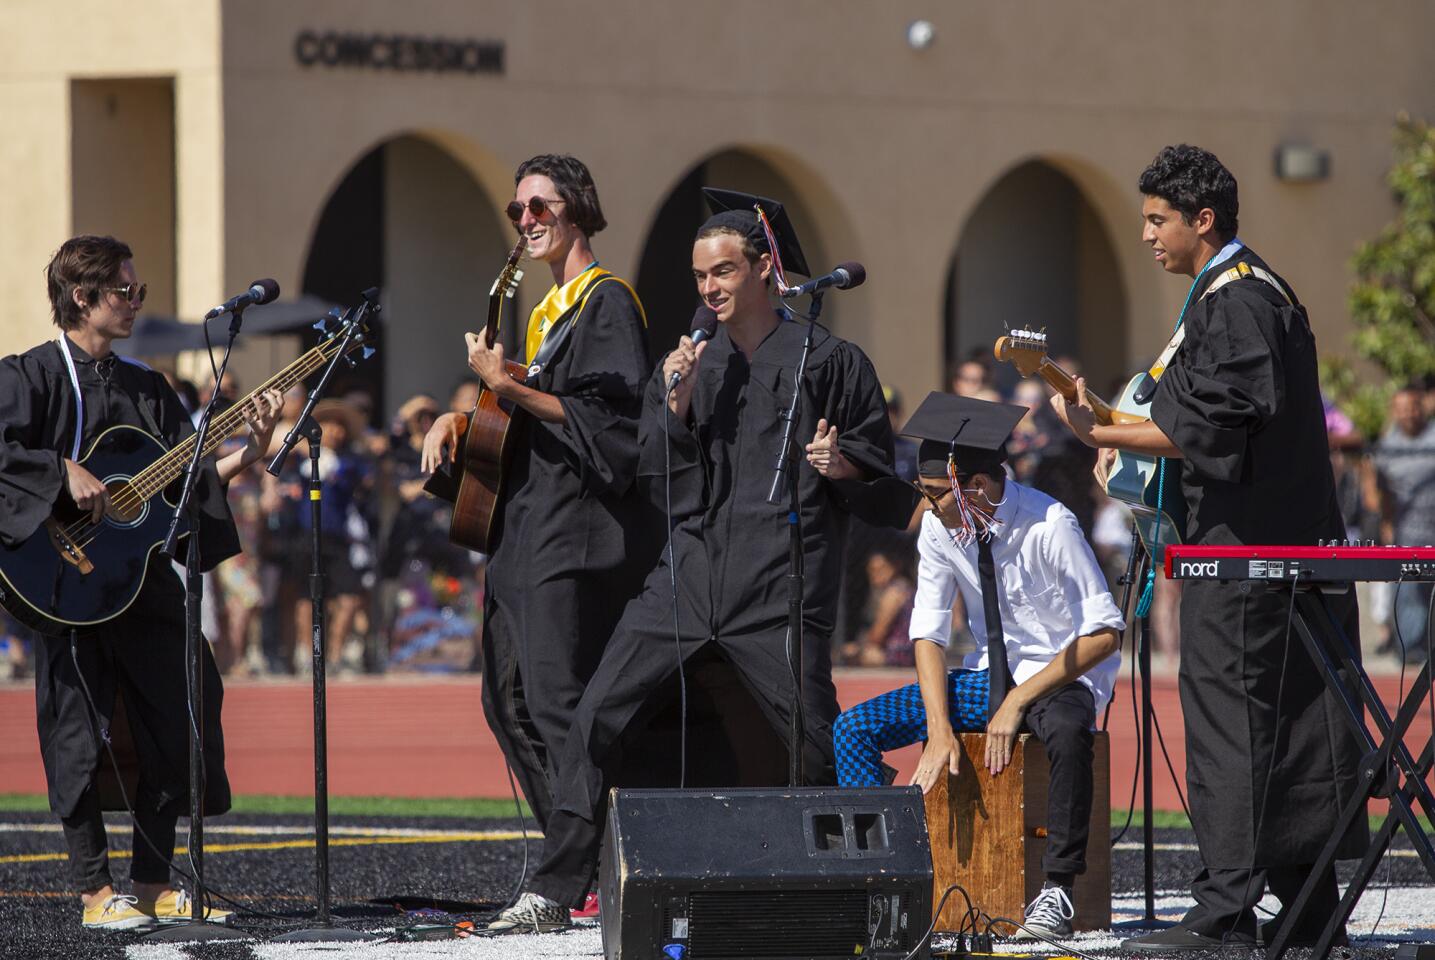 Photo Gallery: Commencement ceremony for Huntington Beach High School class of 2018